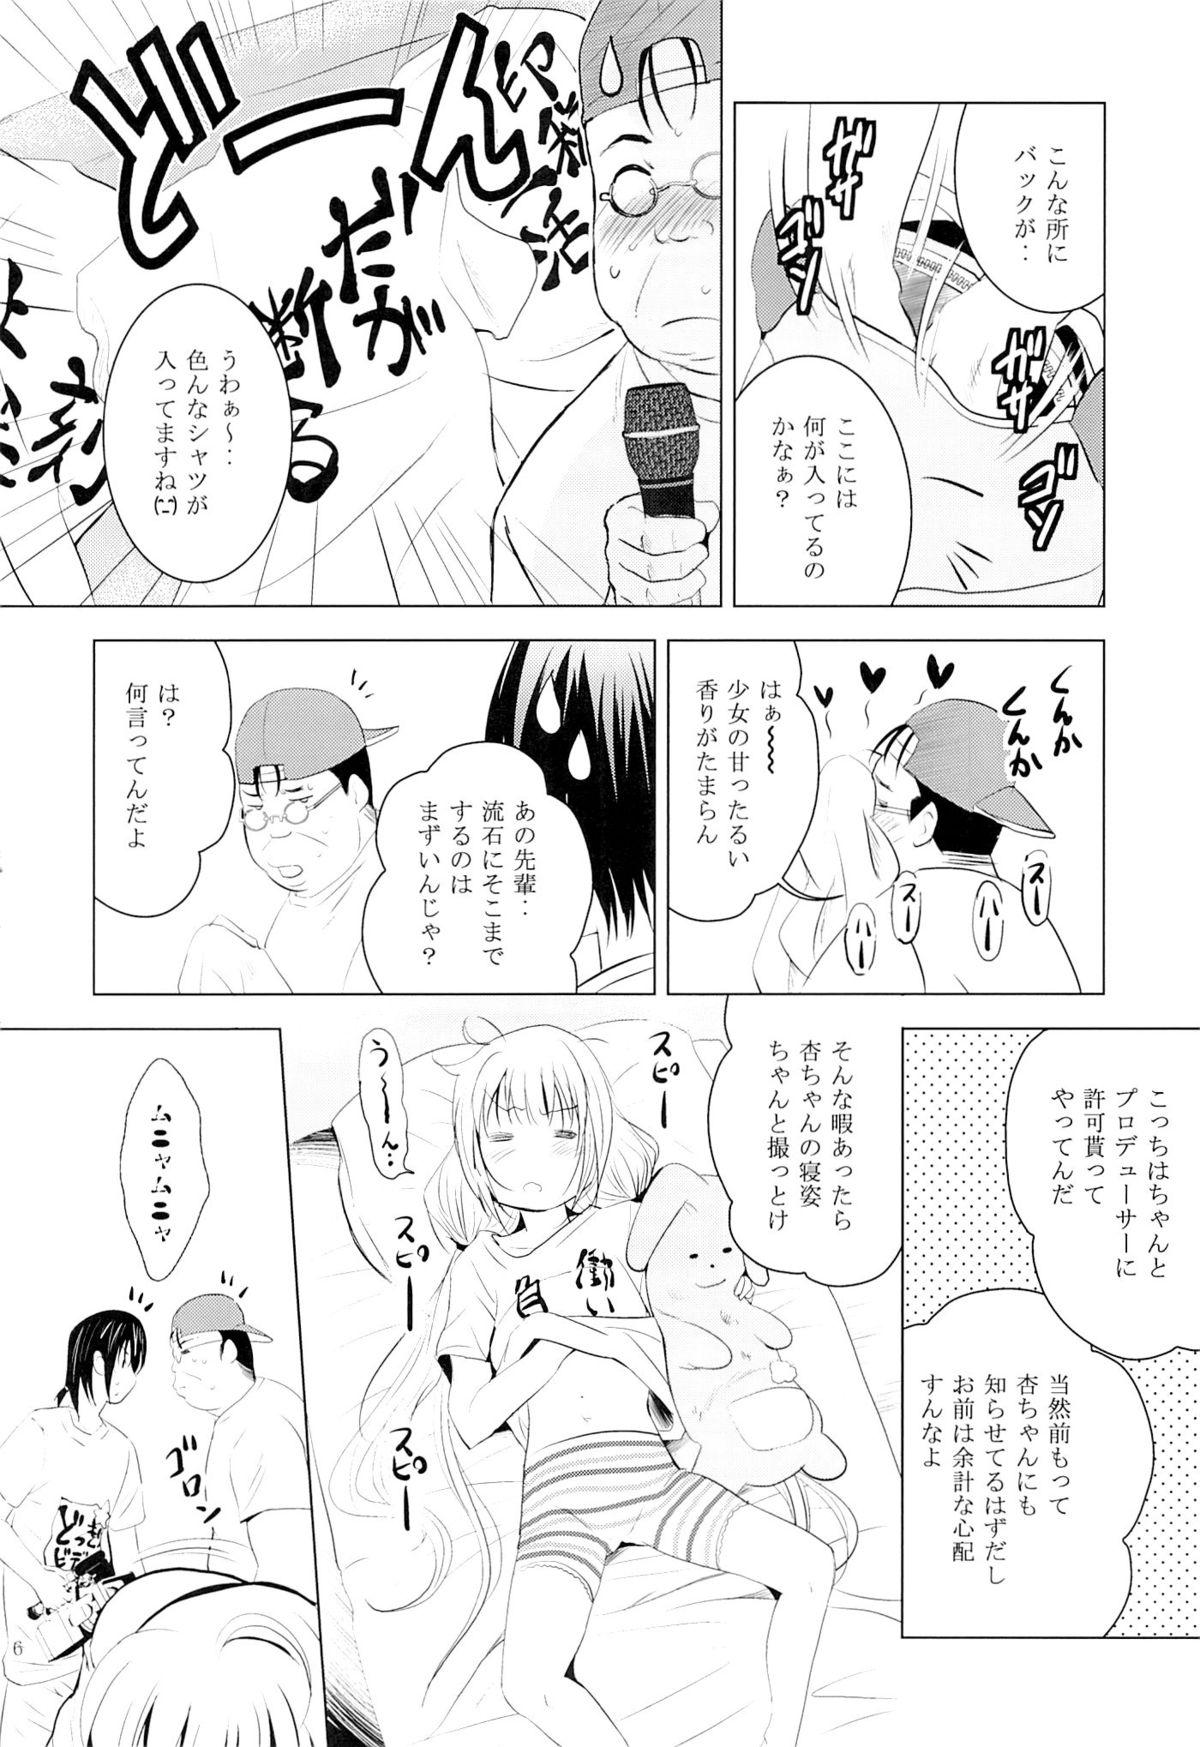  MOUSOU Mini Theater 37 - The idolmaster Gay Orgy - Page 5